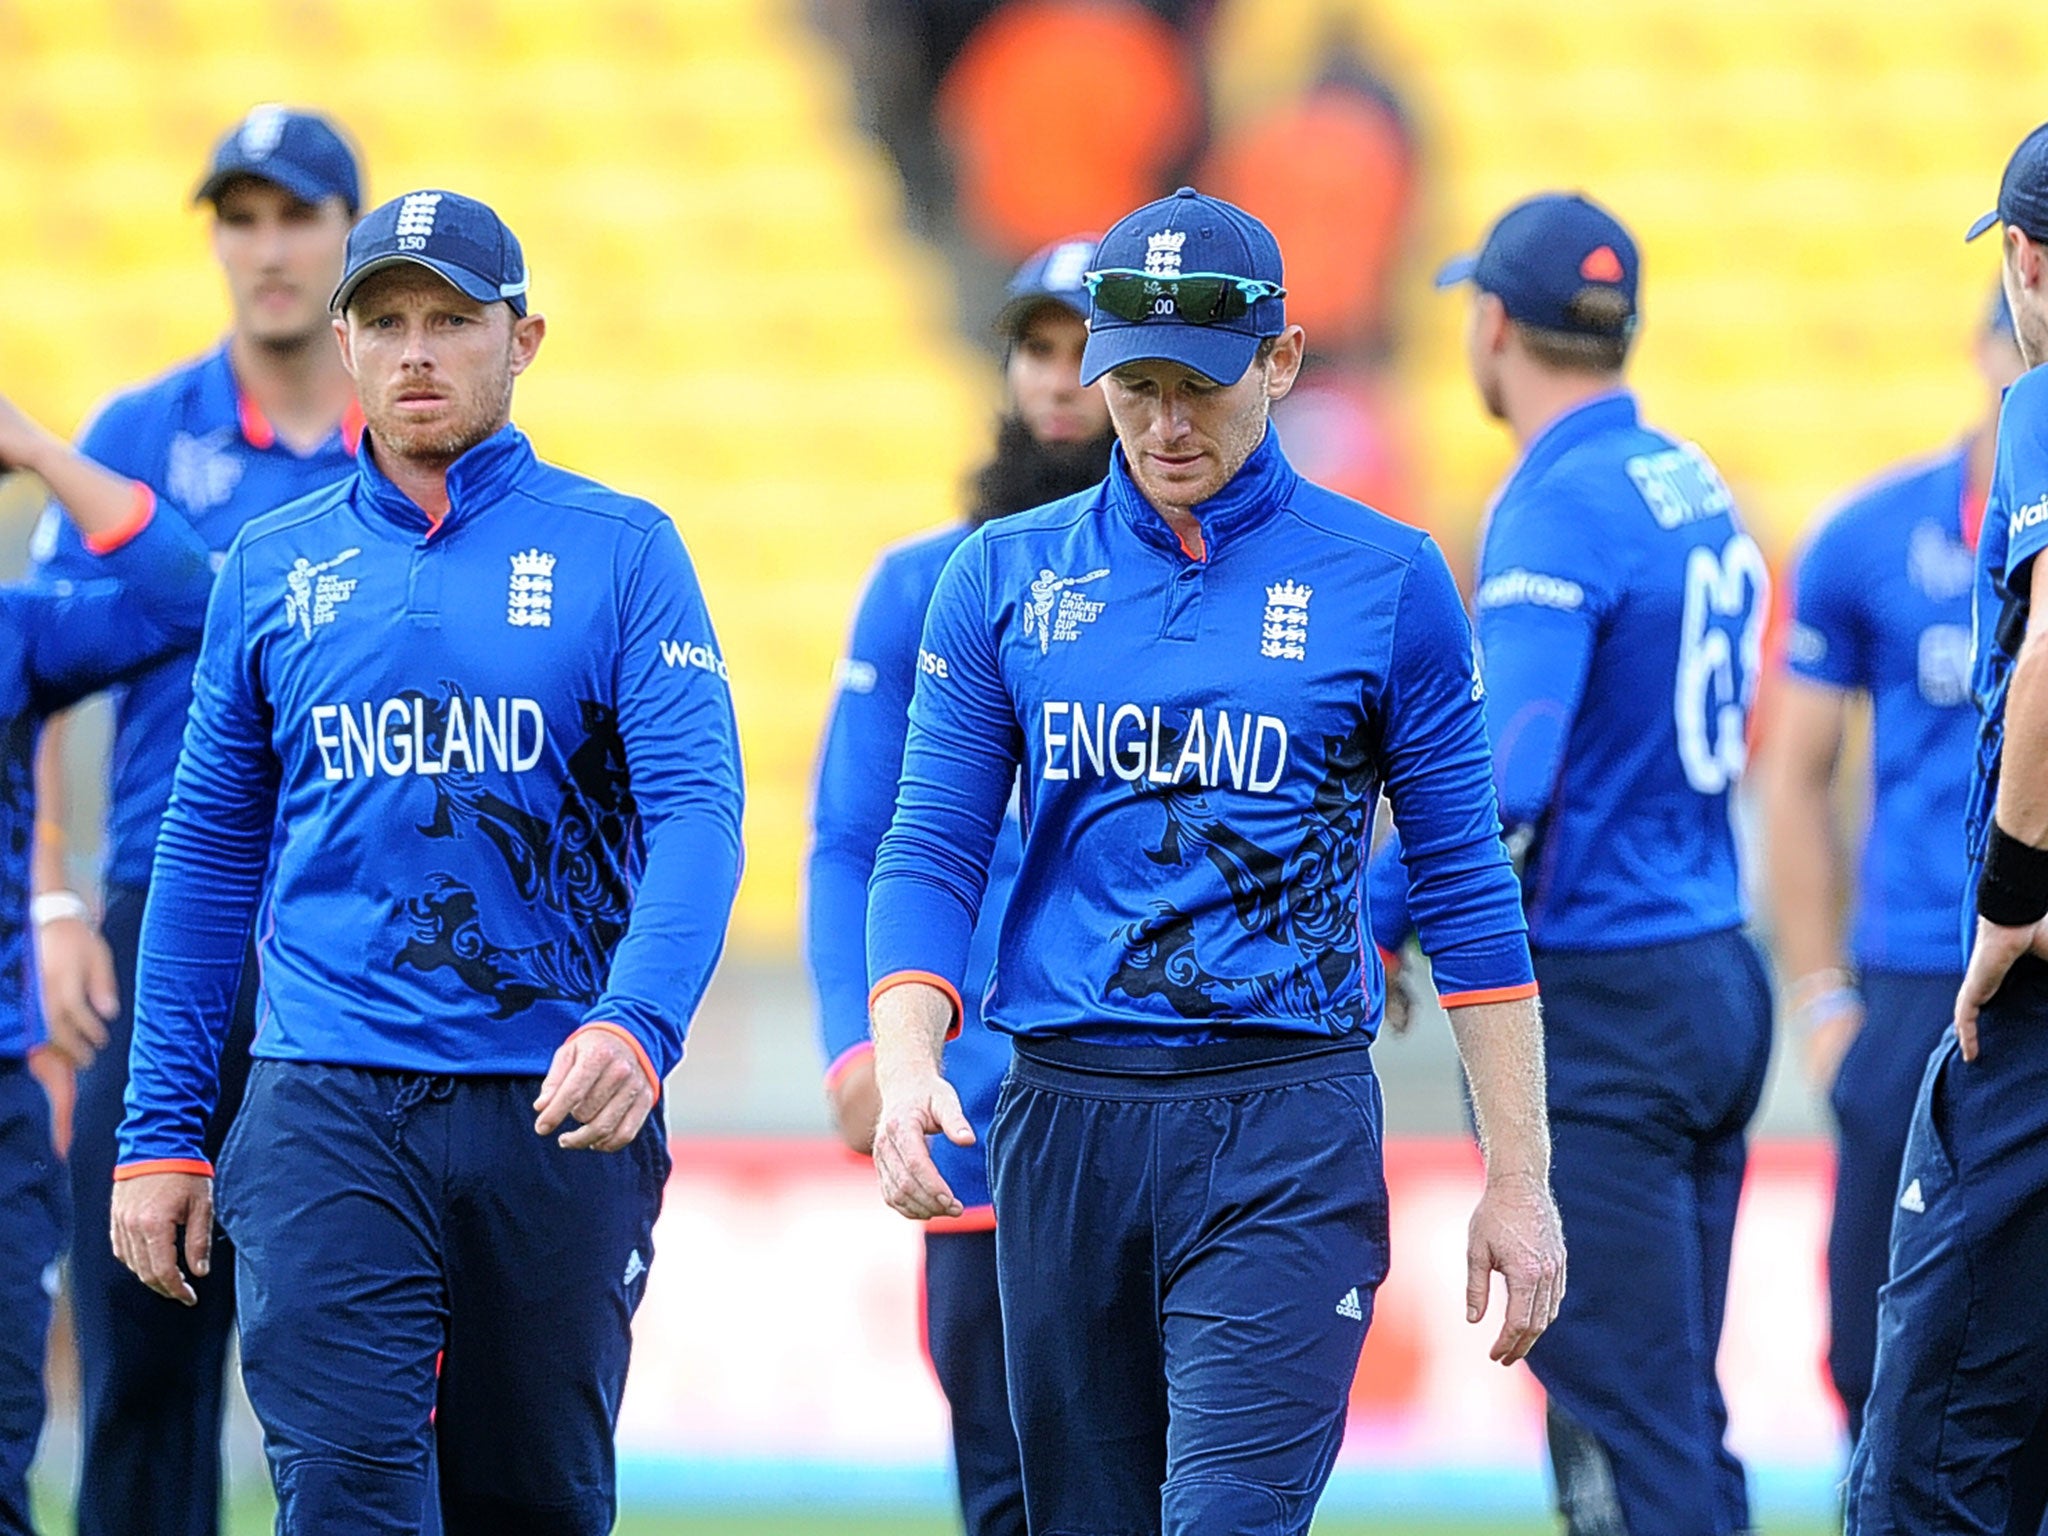 England captain Eoin Morgan leads his team from the field after their humiliating defeat to Sri Lanka